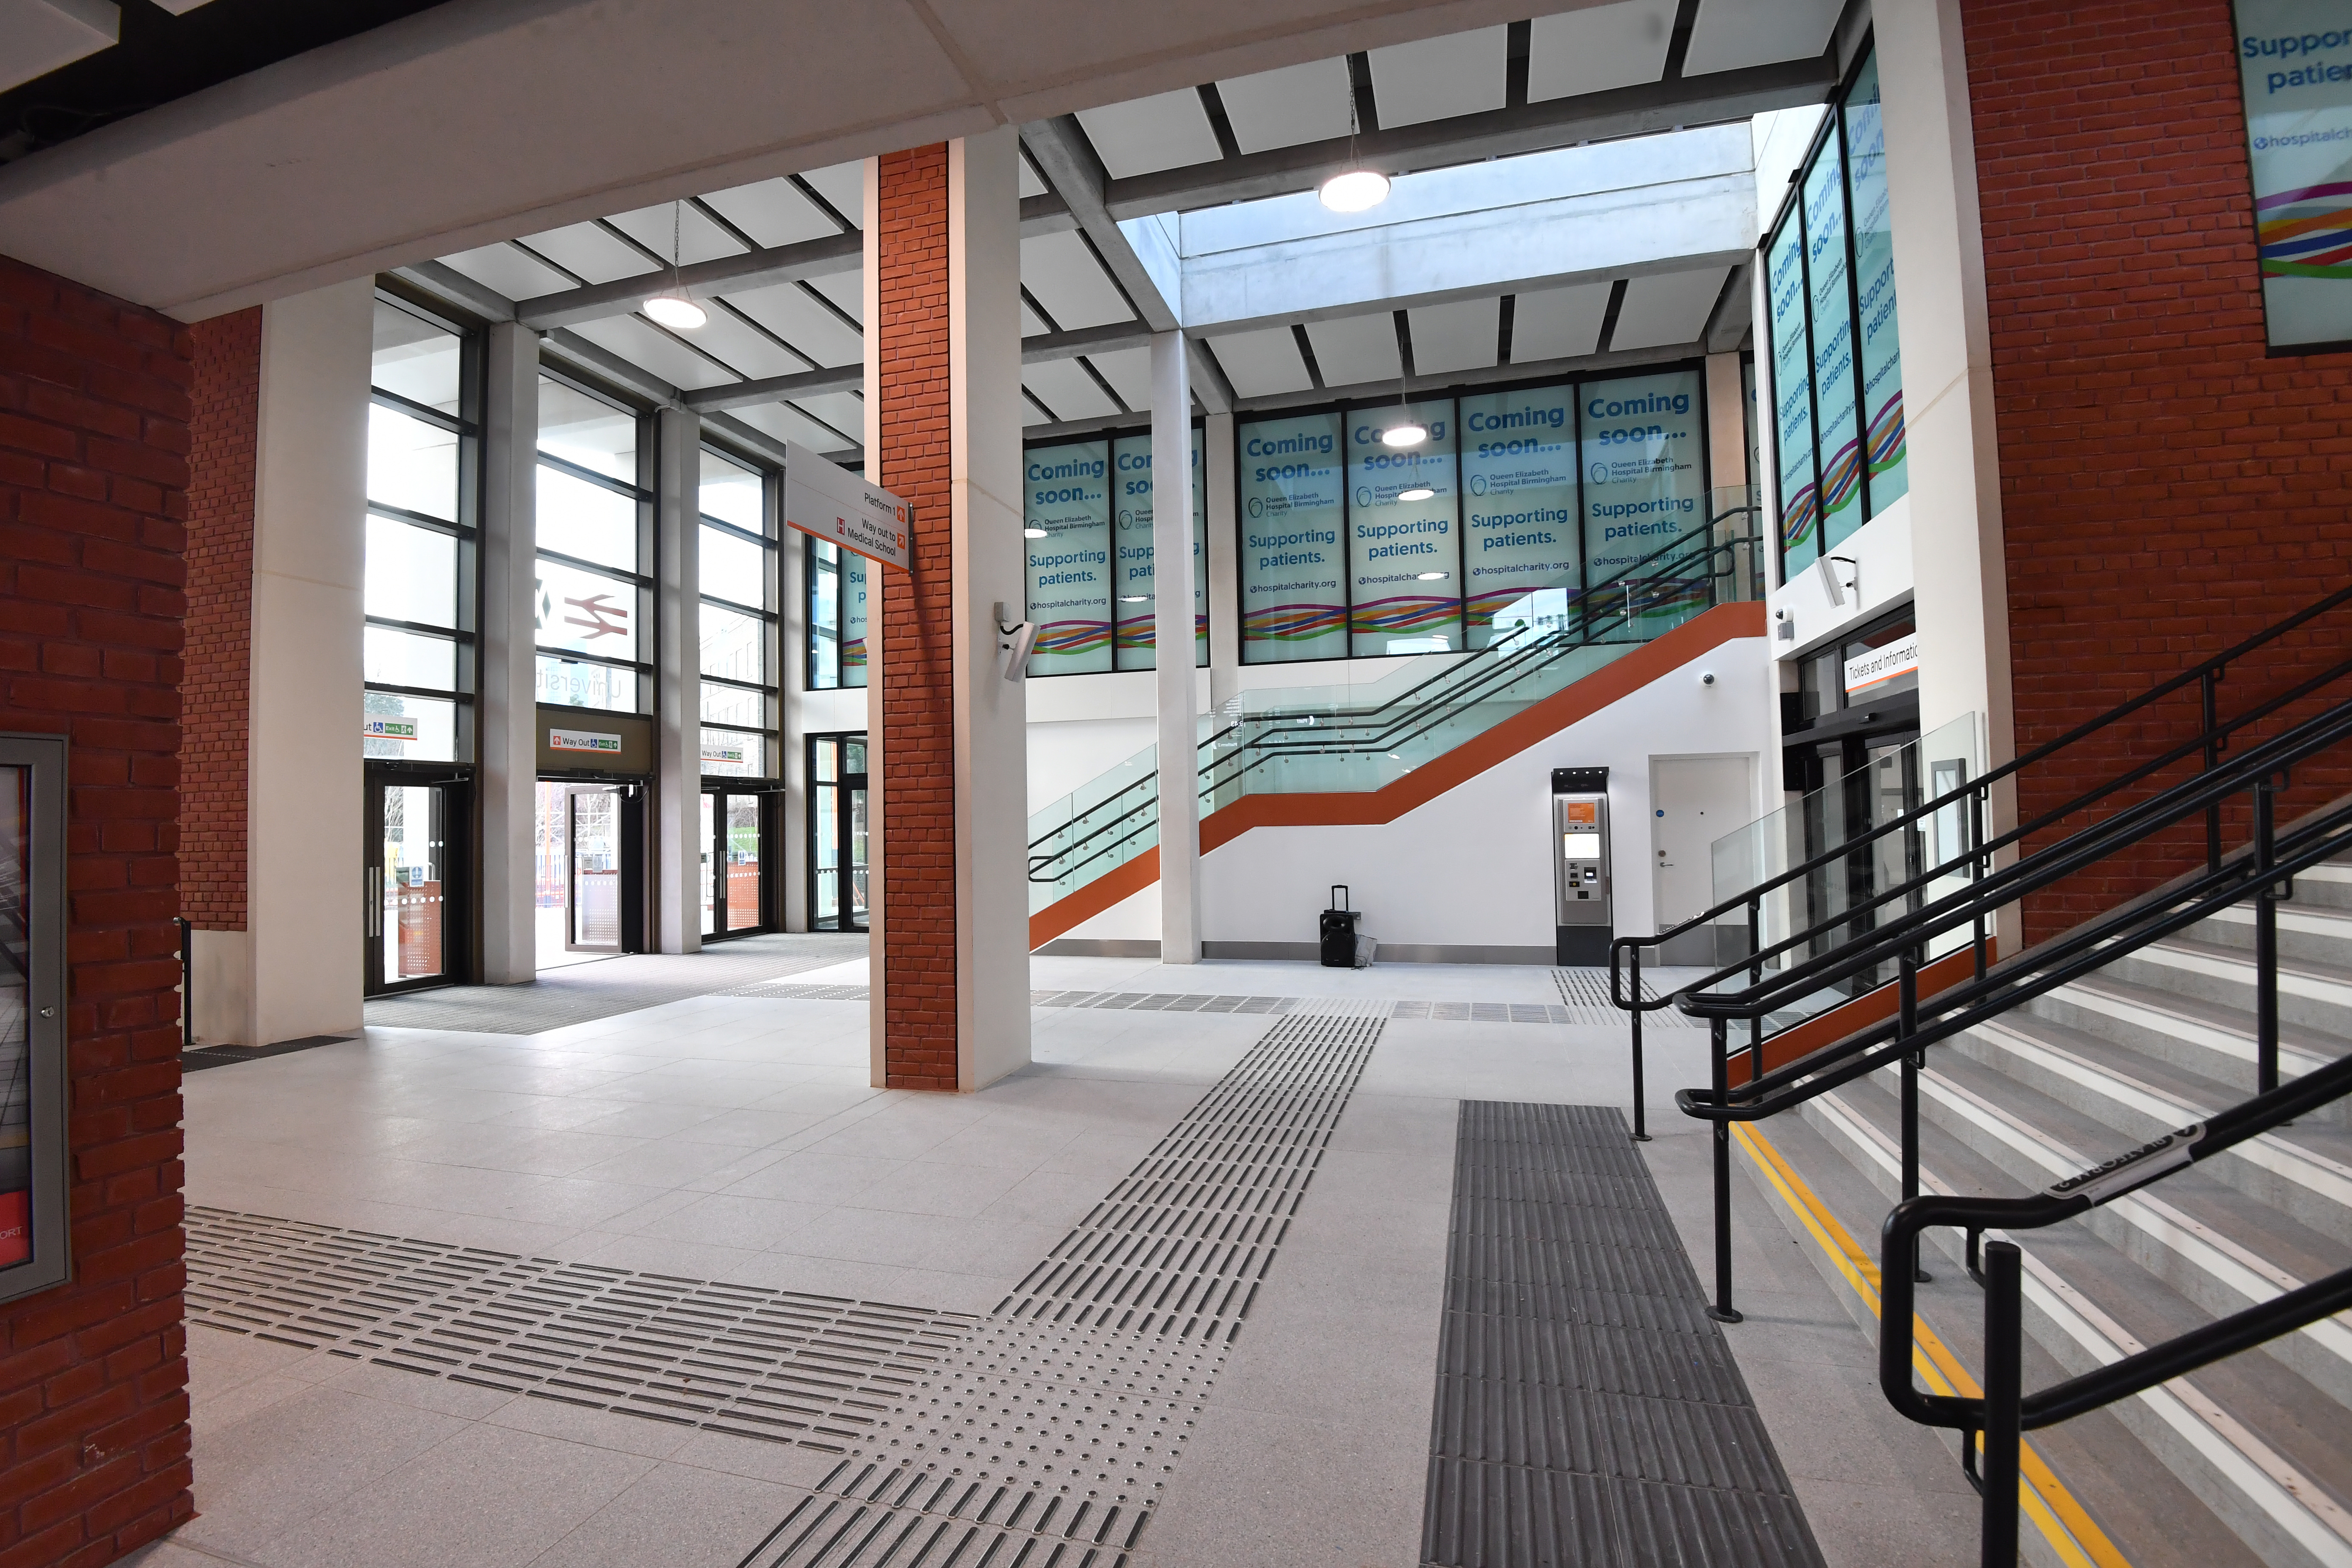 Inside one of the new University Railway Station buildings